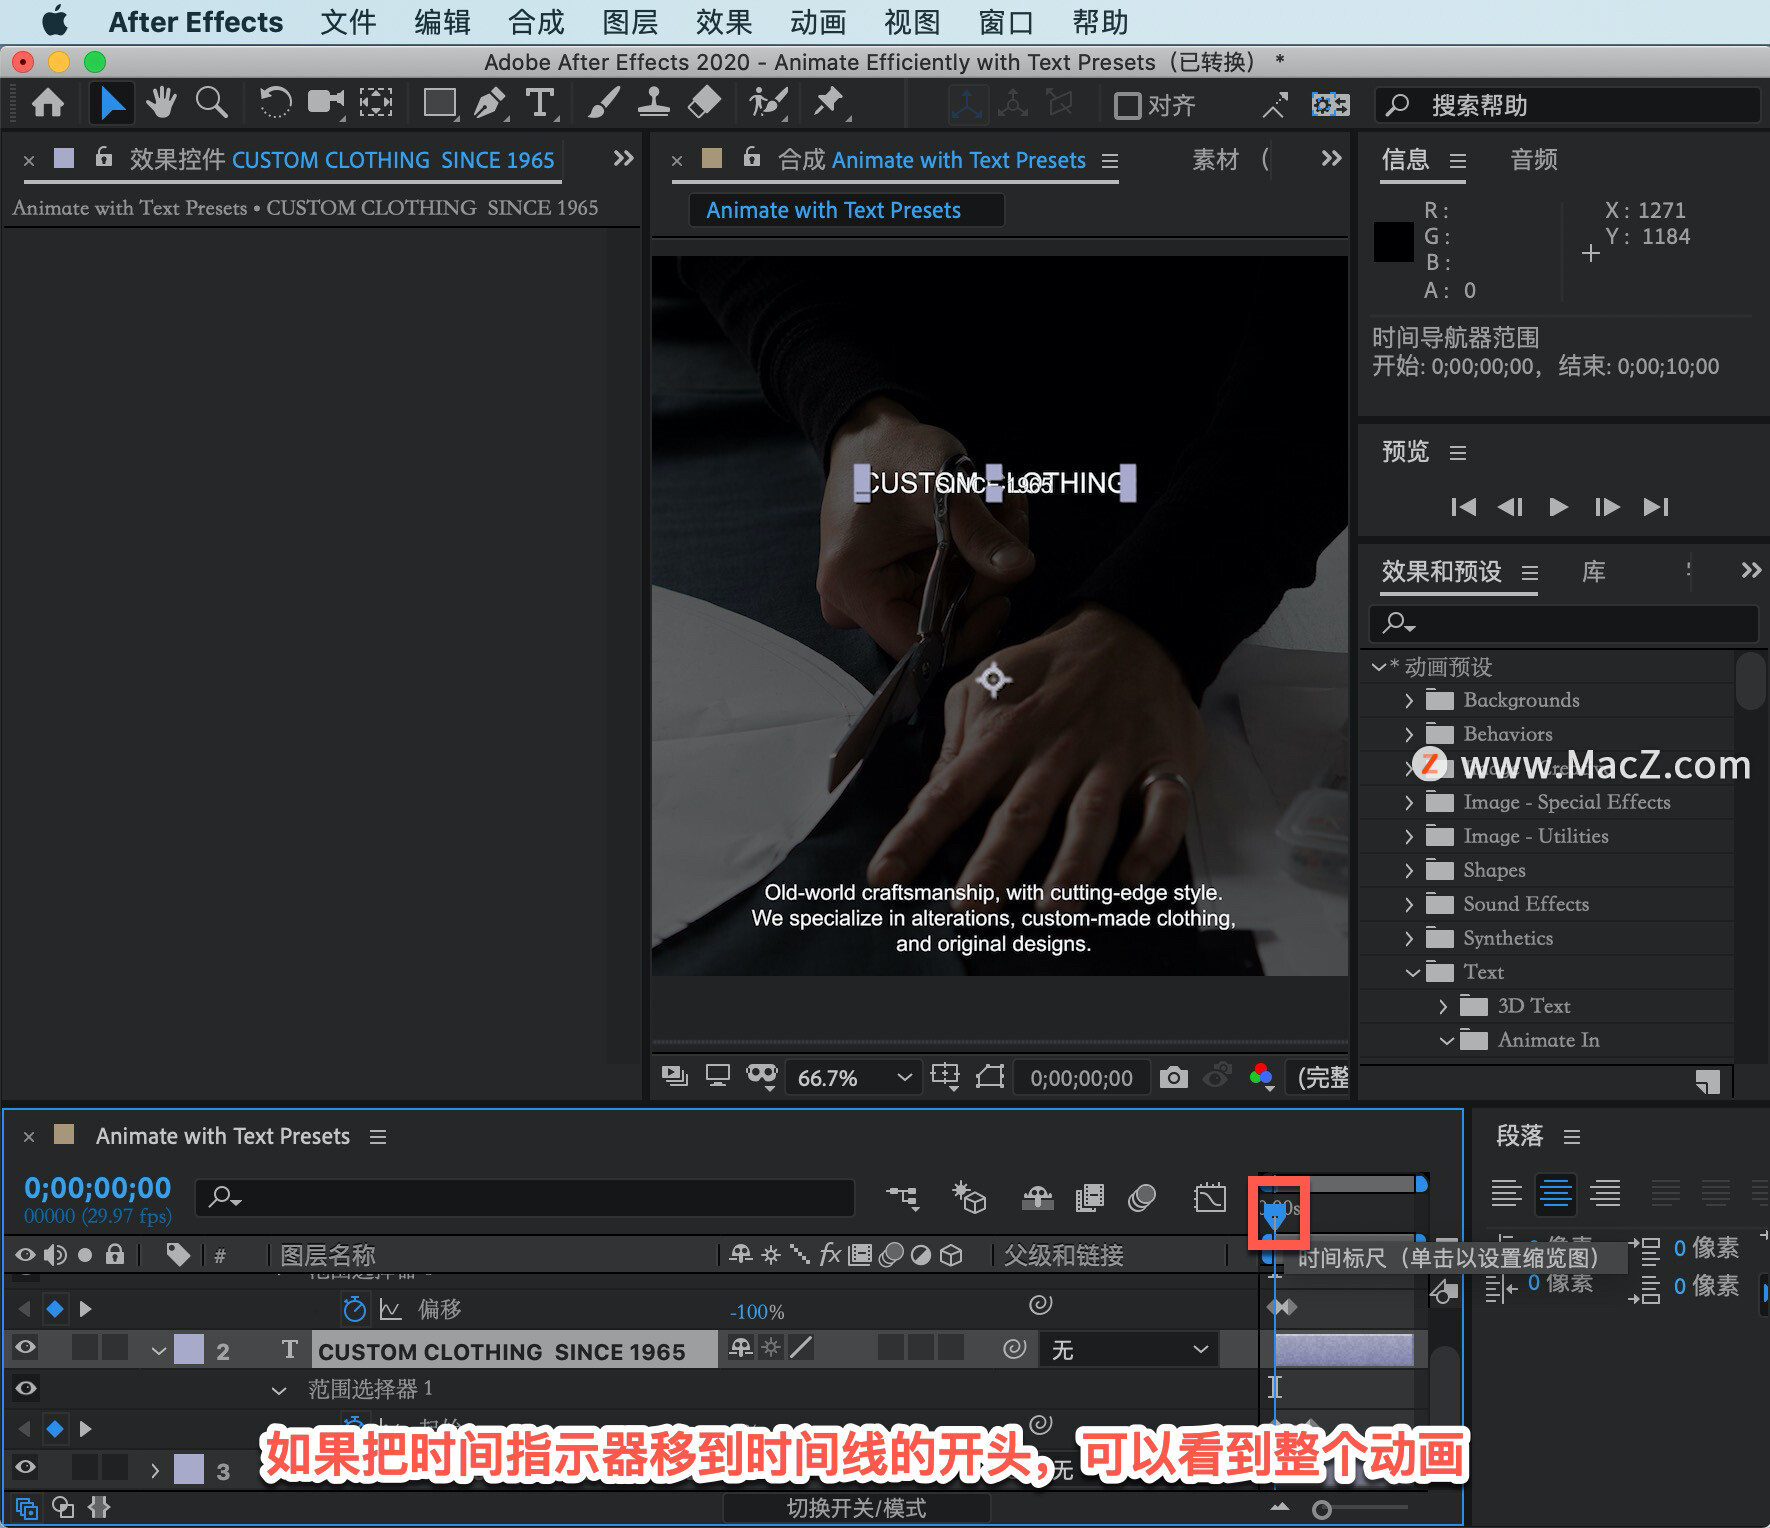 After Effects 教程「16」，如何在 After Effects 中更改动画的时间？